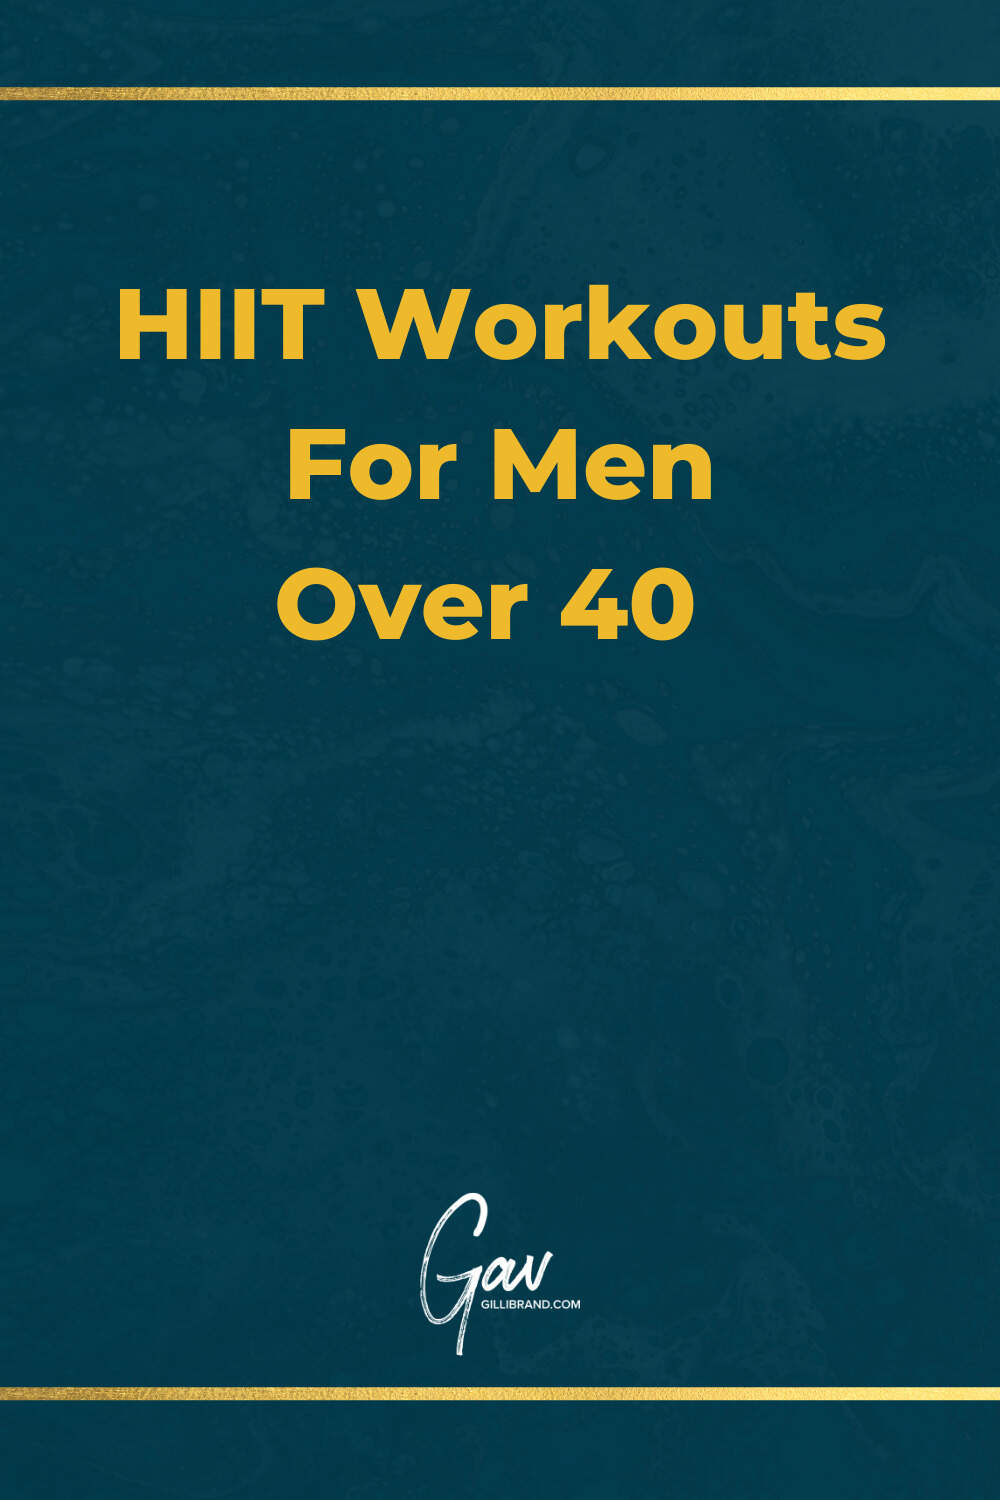 Featured image for “HIIT workouts for men over 40”